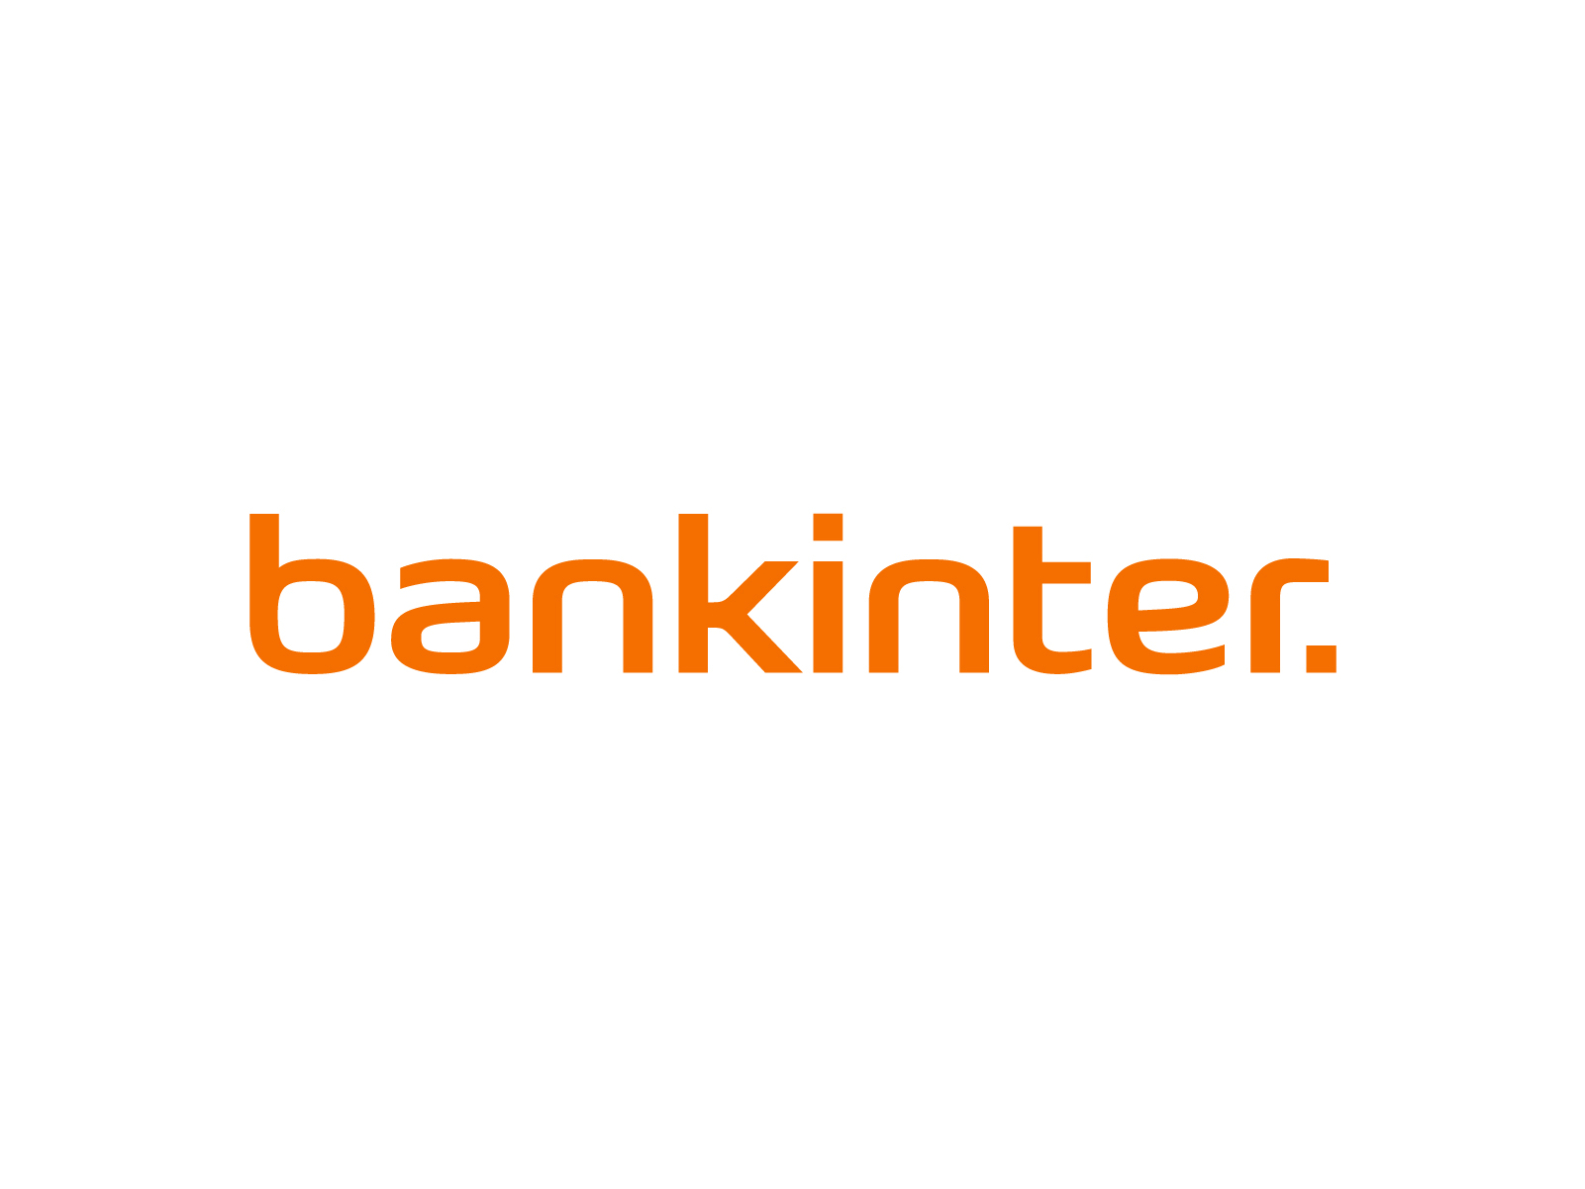 Bankinter logo by Miles Newlyn on Dribbble